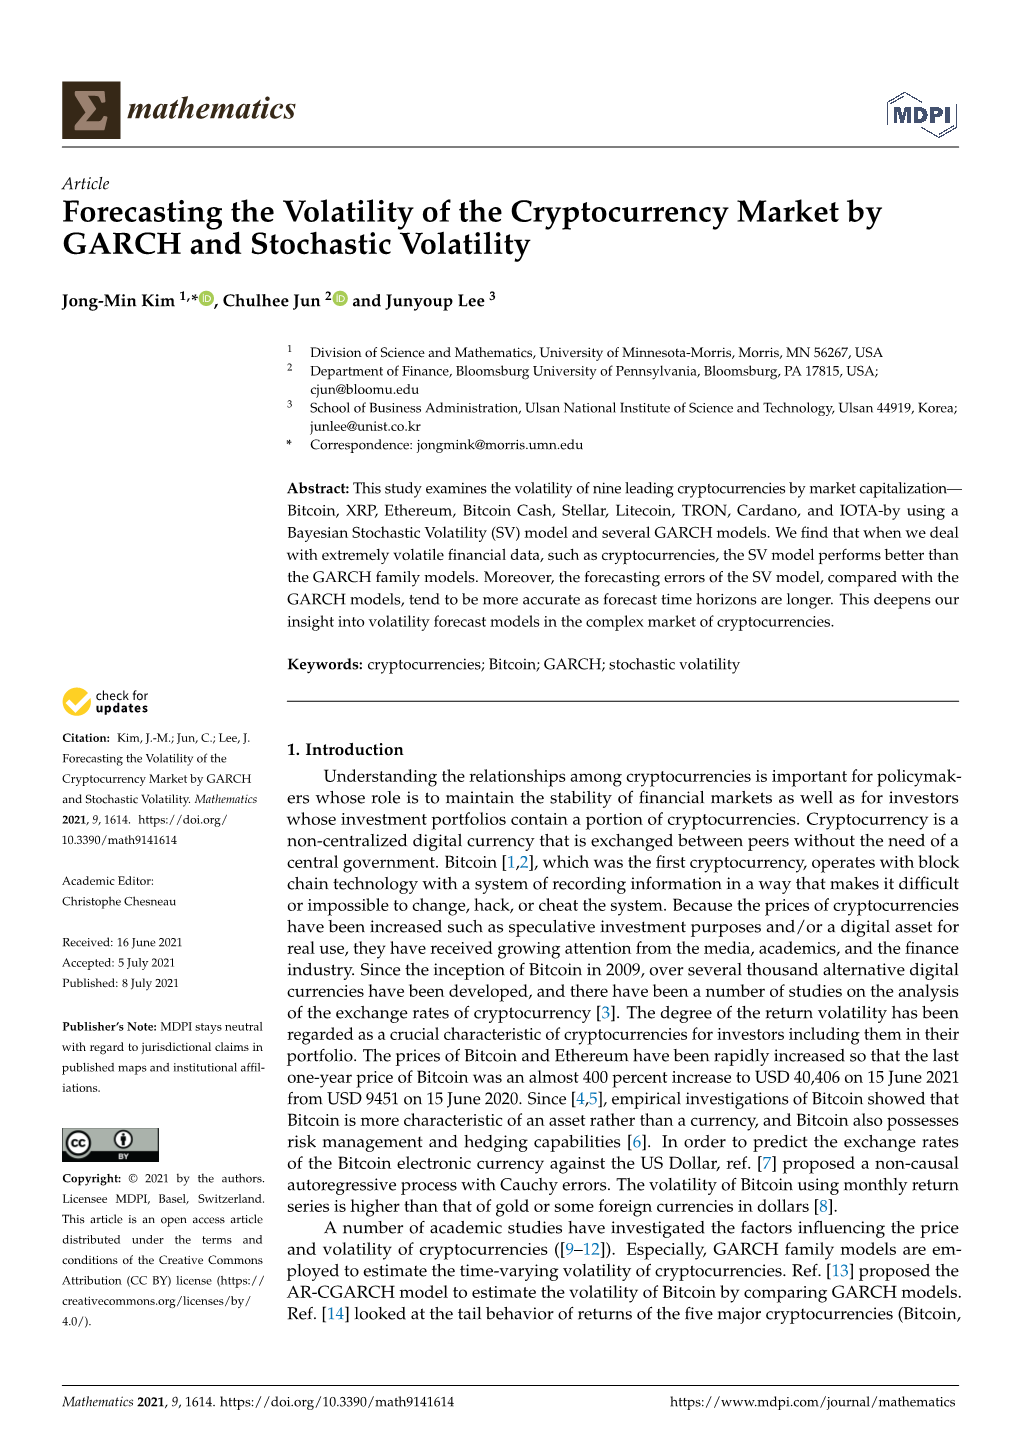 Forecasting the Volatility of the Cryptocurrency Market by GARCH and Stochastic Volatility